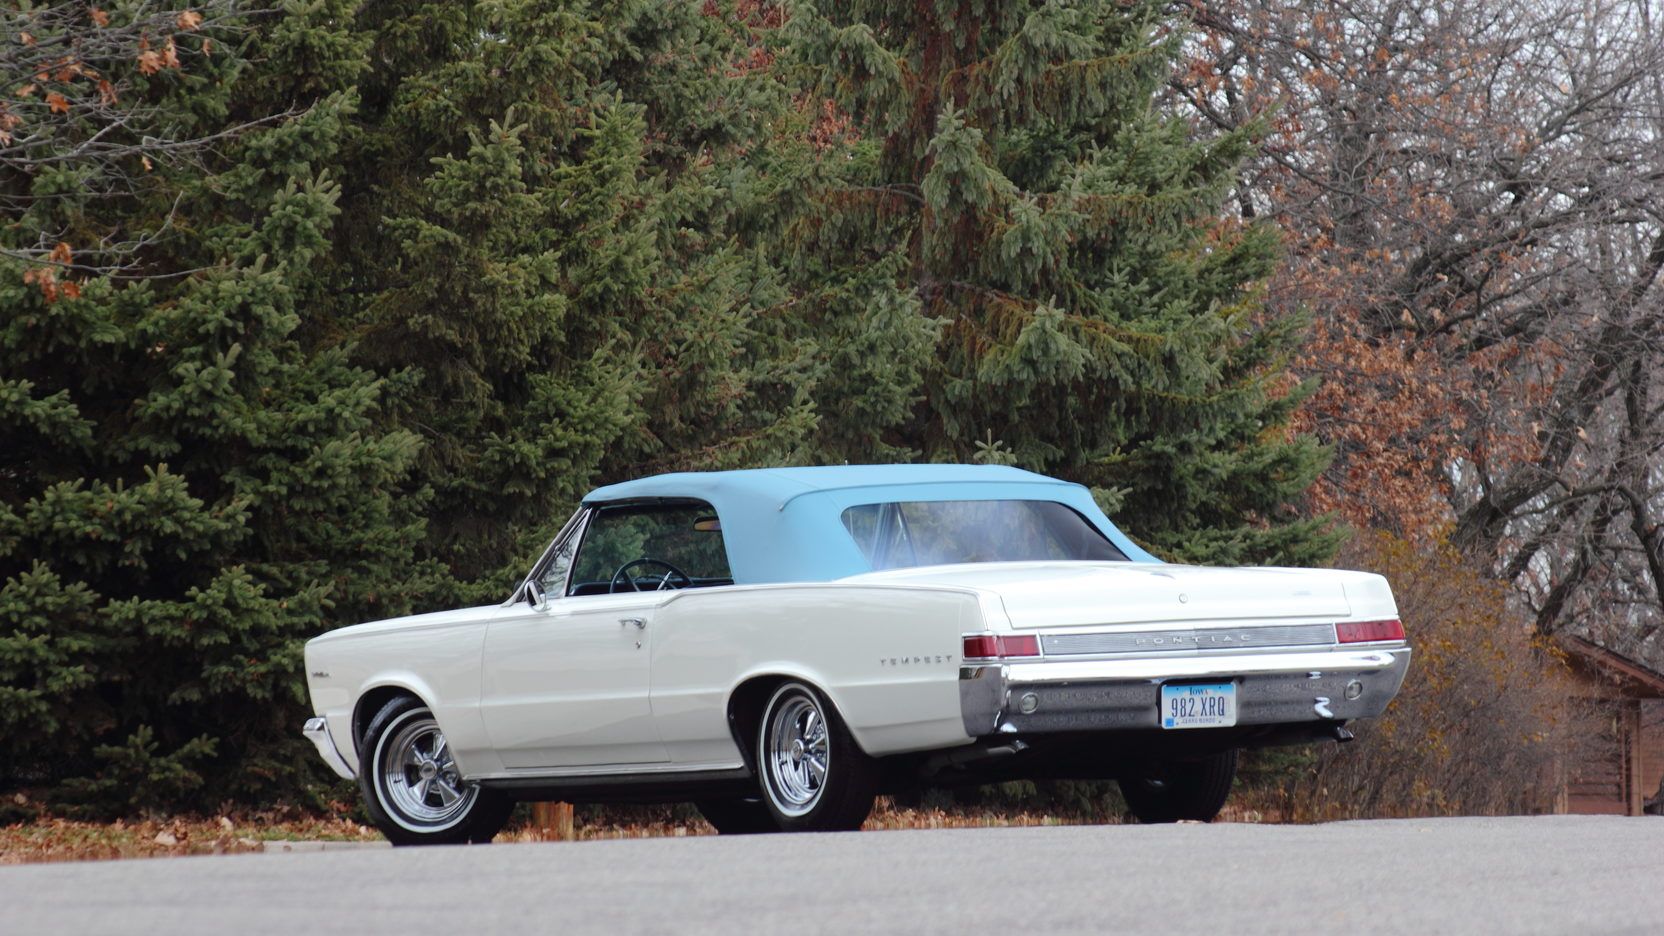 1965 Pontiac Tempest convertible 326, white, candy blue rooftop, rear